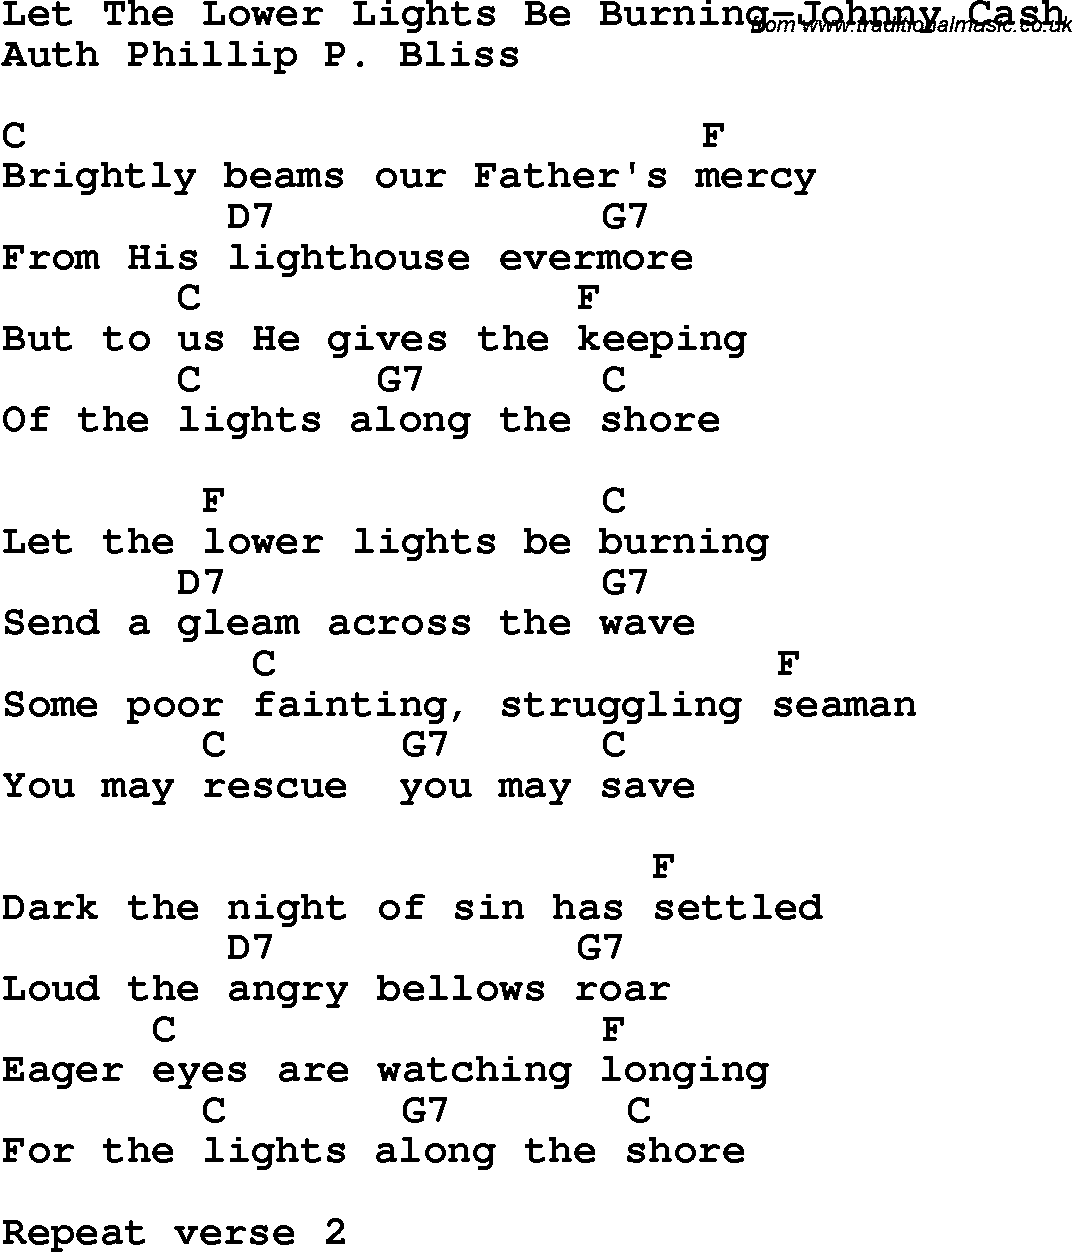 Country, Southern and Bluegrass Gospel Song Let The Lower Lights Be Burning-Johnny Cash lyrics and chords